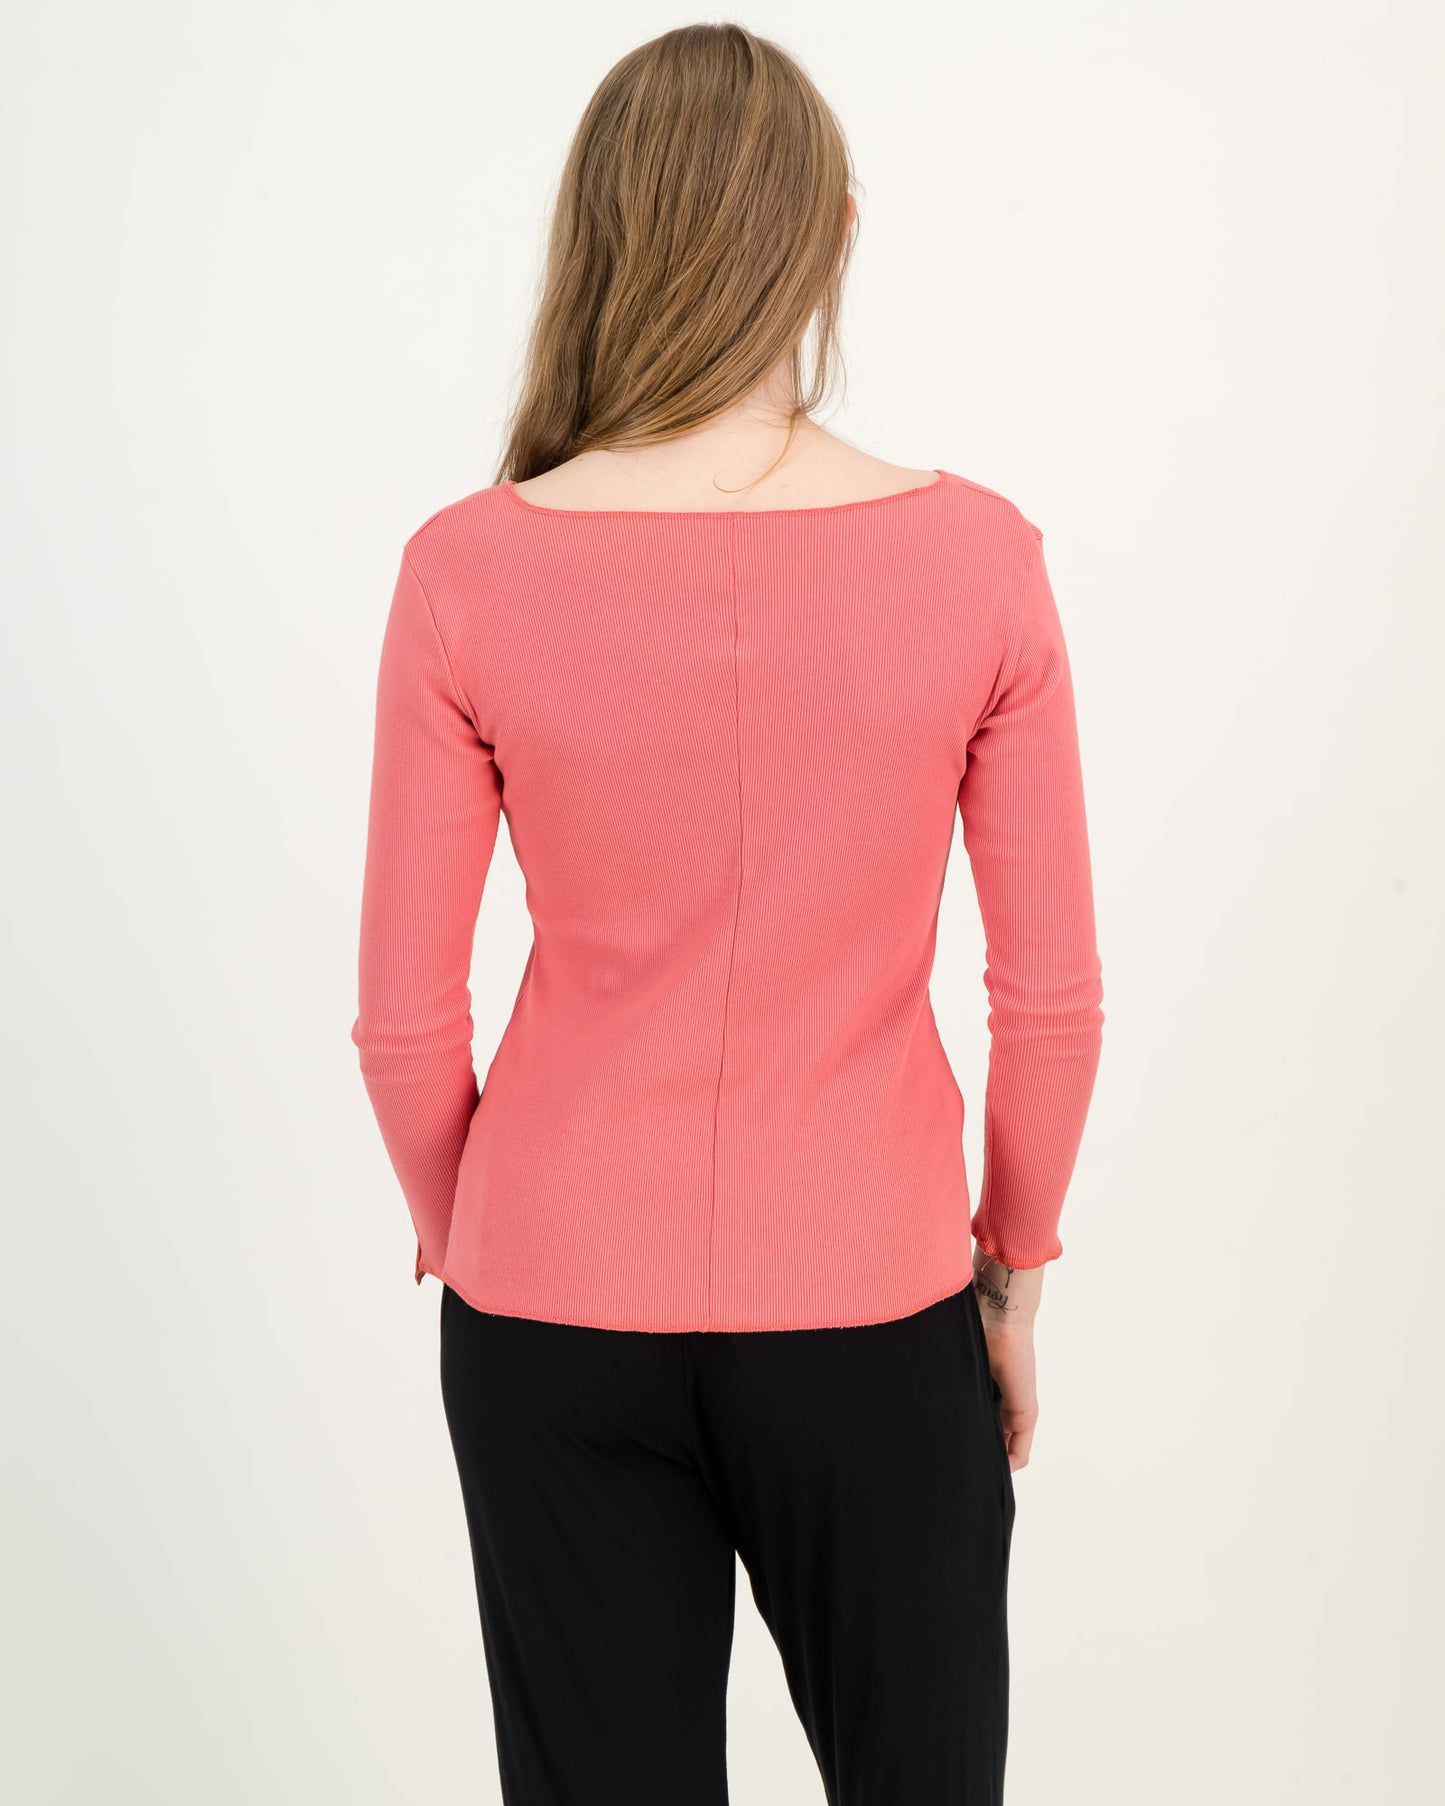 Overdyed Cotton Rib Top - Coral